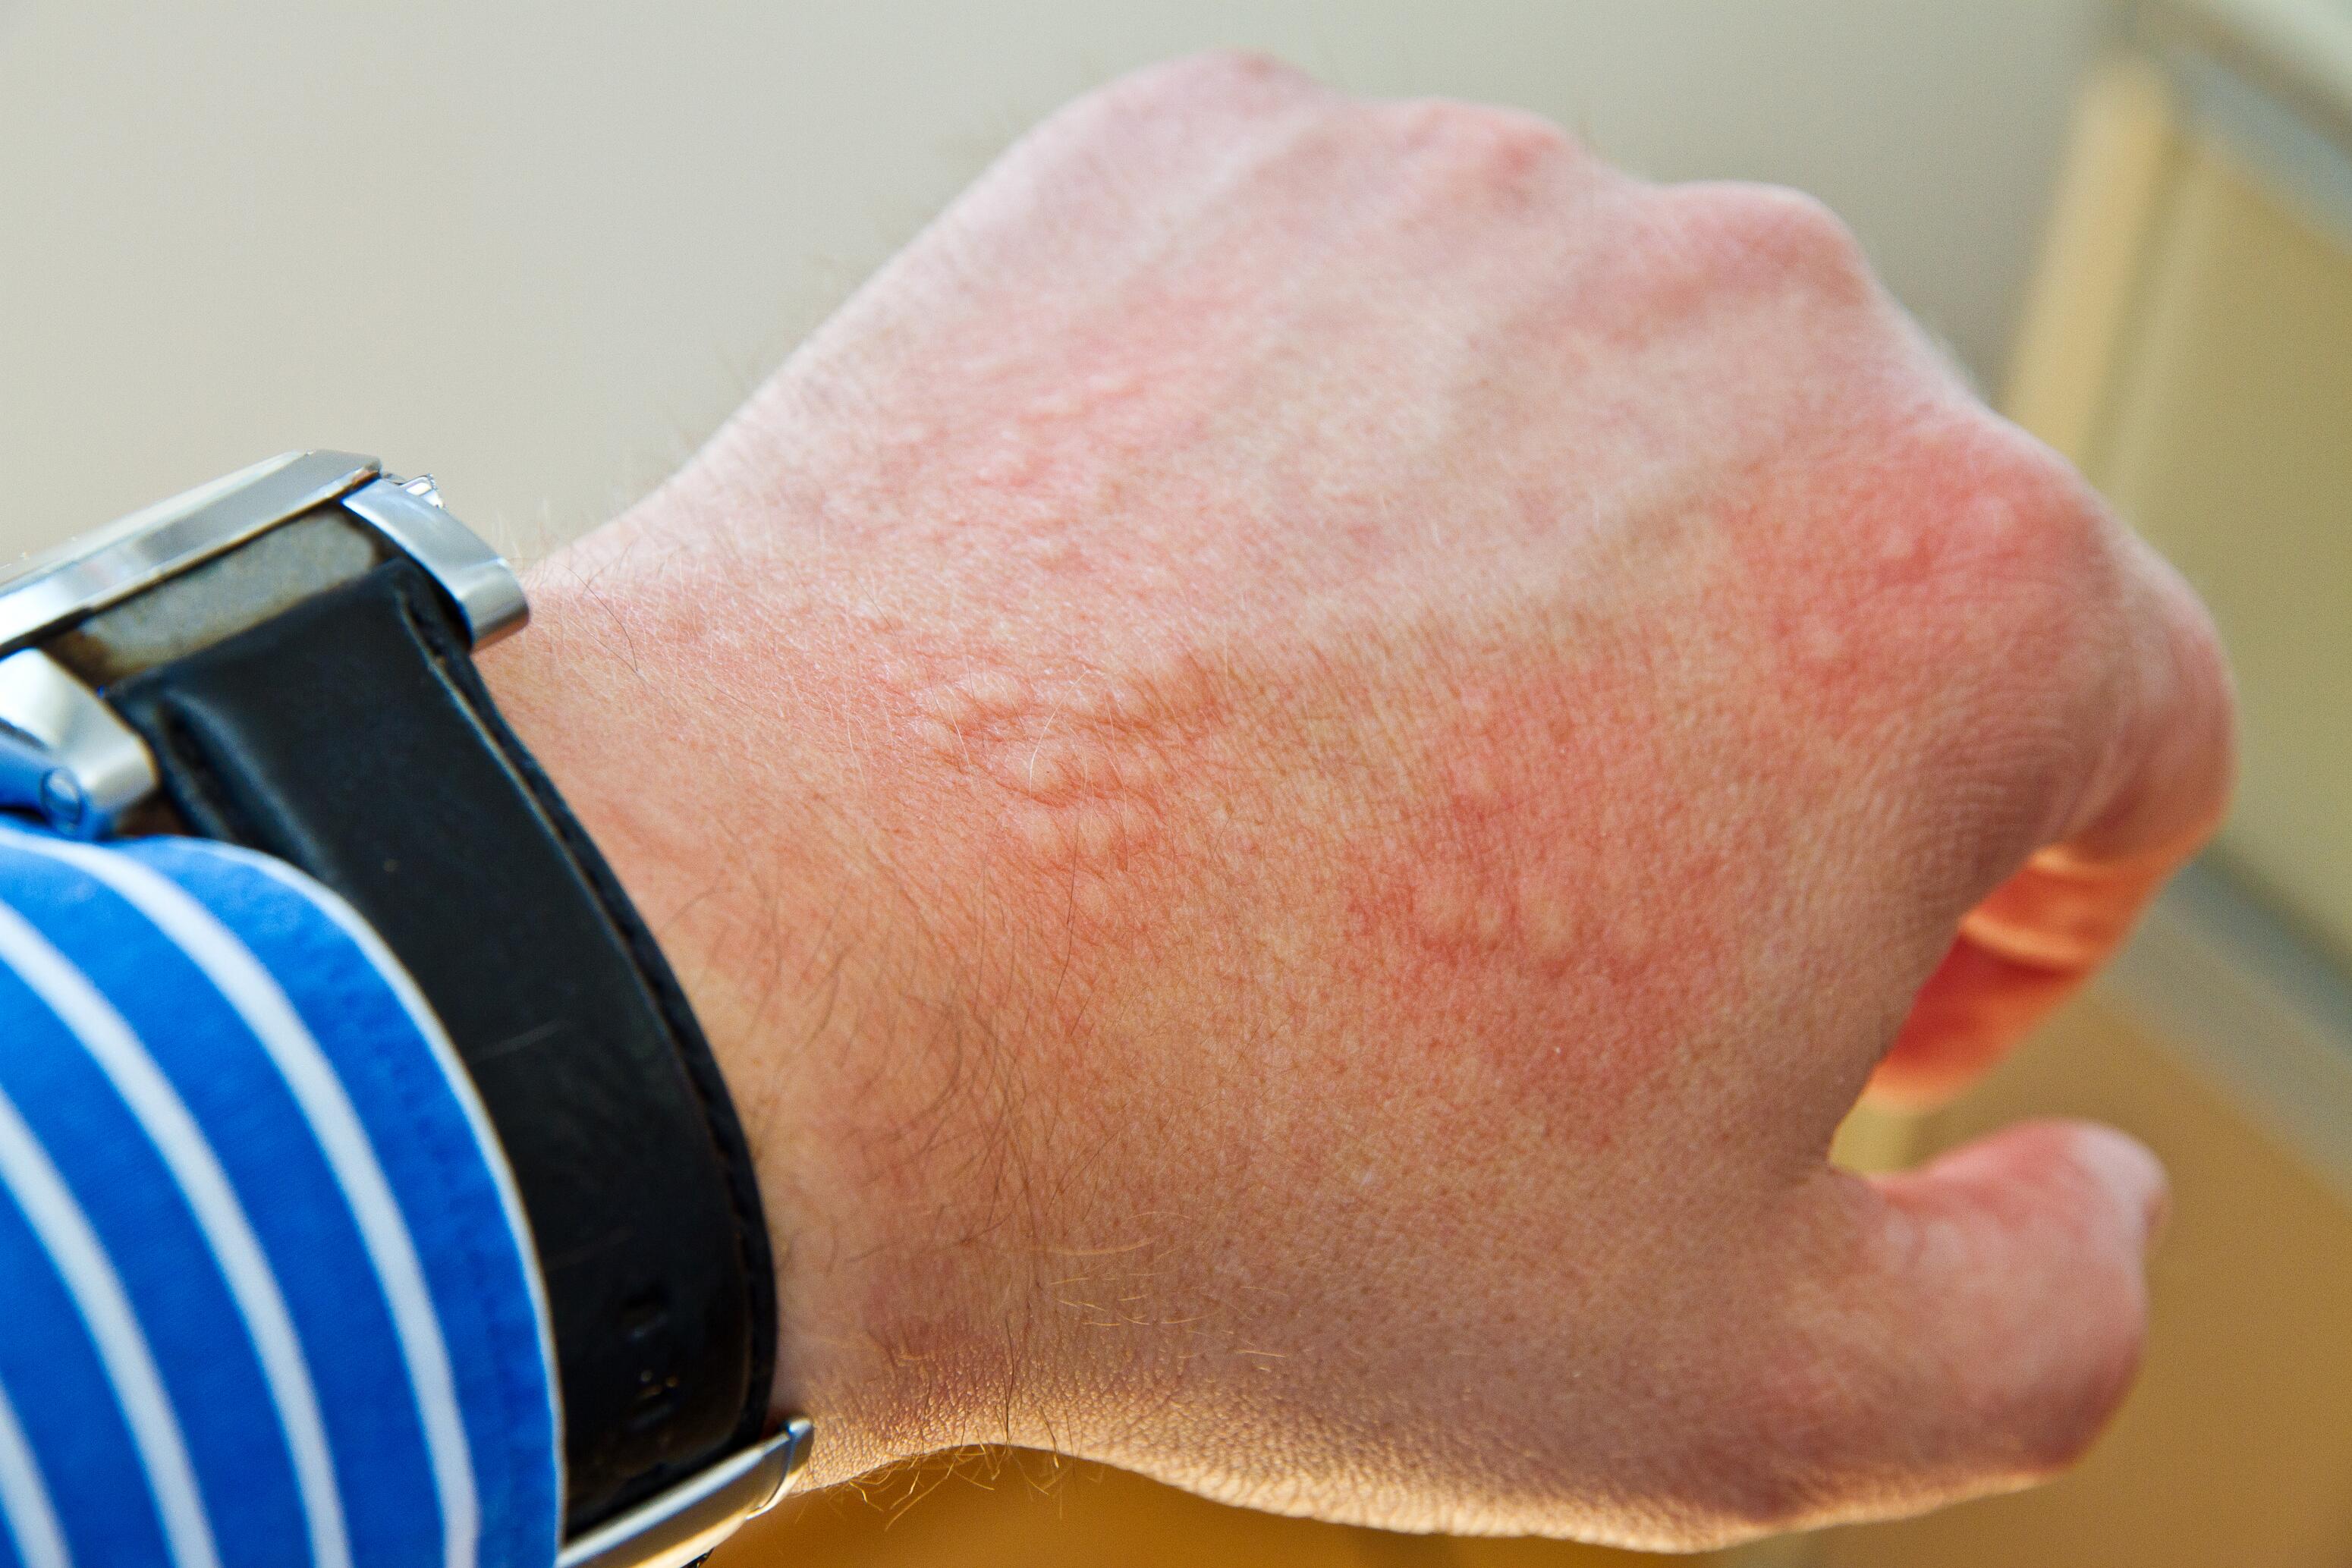 Hand with urticaria spots